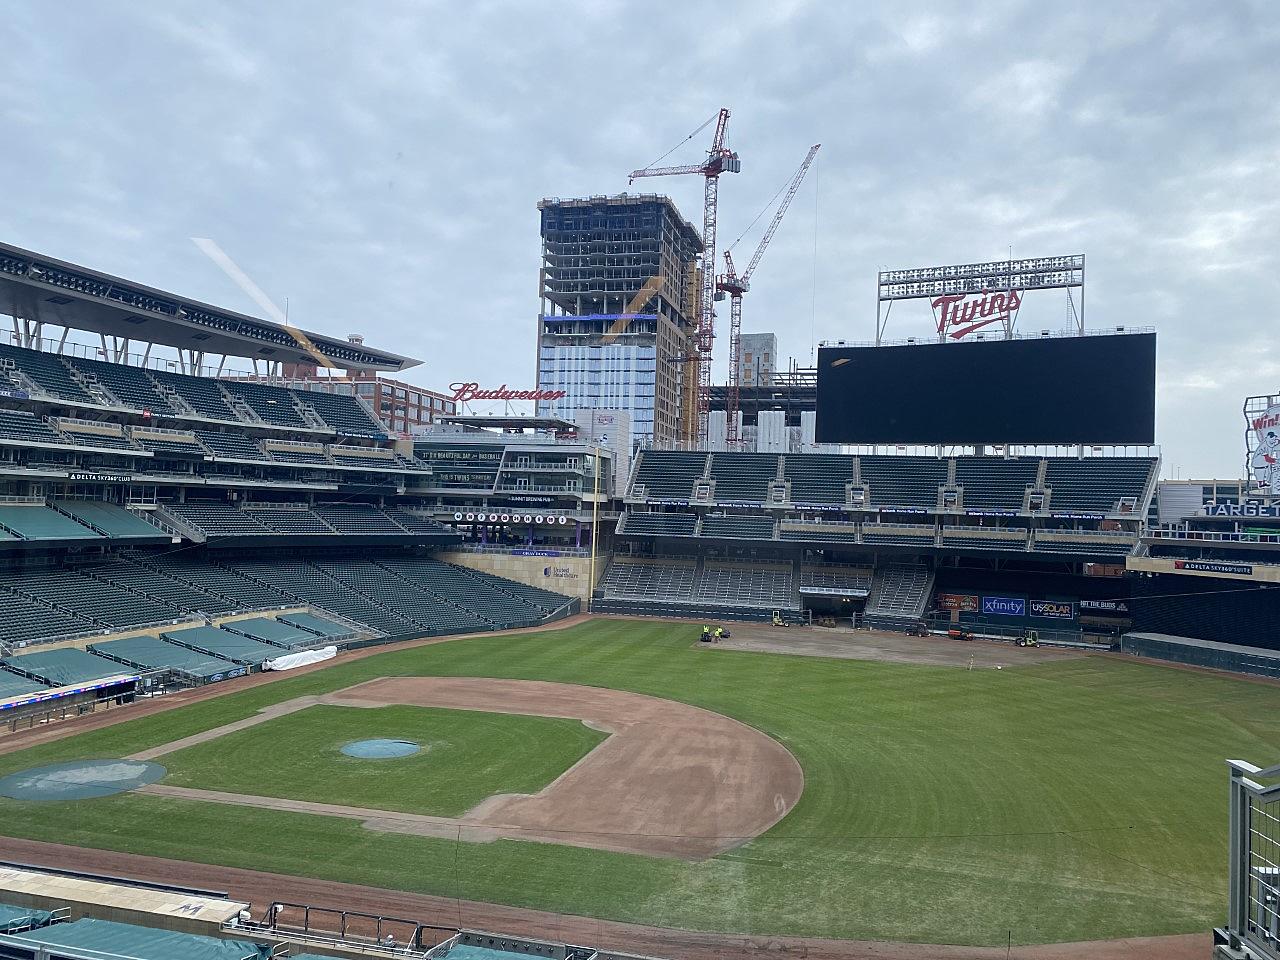 Play Ball at Target Field, Home of the Minnesota Twins